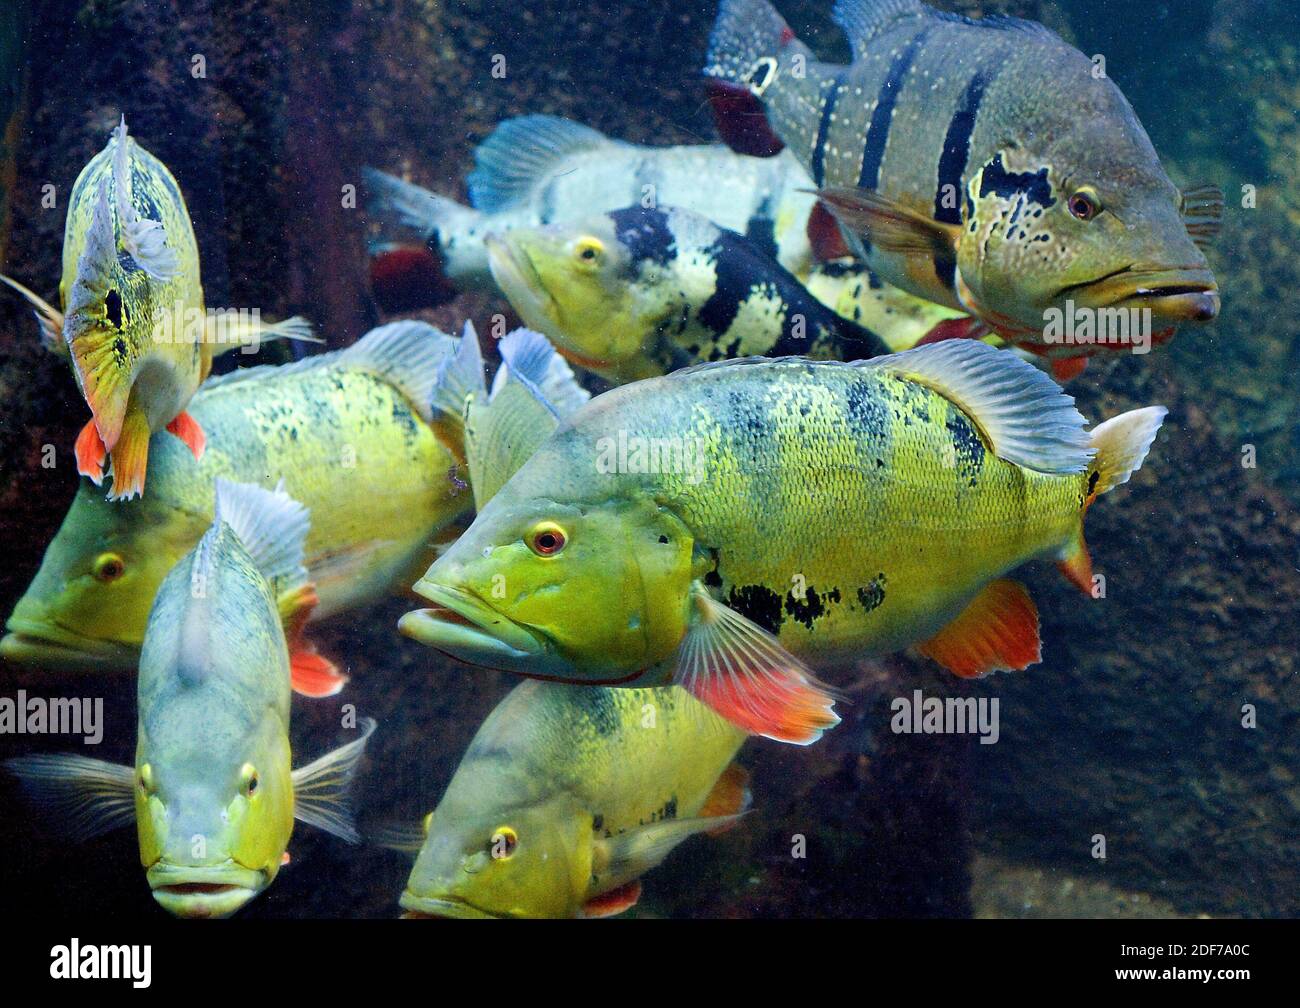 Butterfly peacock bass (Cichla ocellaris) is a fresh water fish native to Brazil. Stock Photo